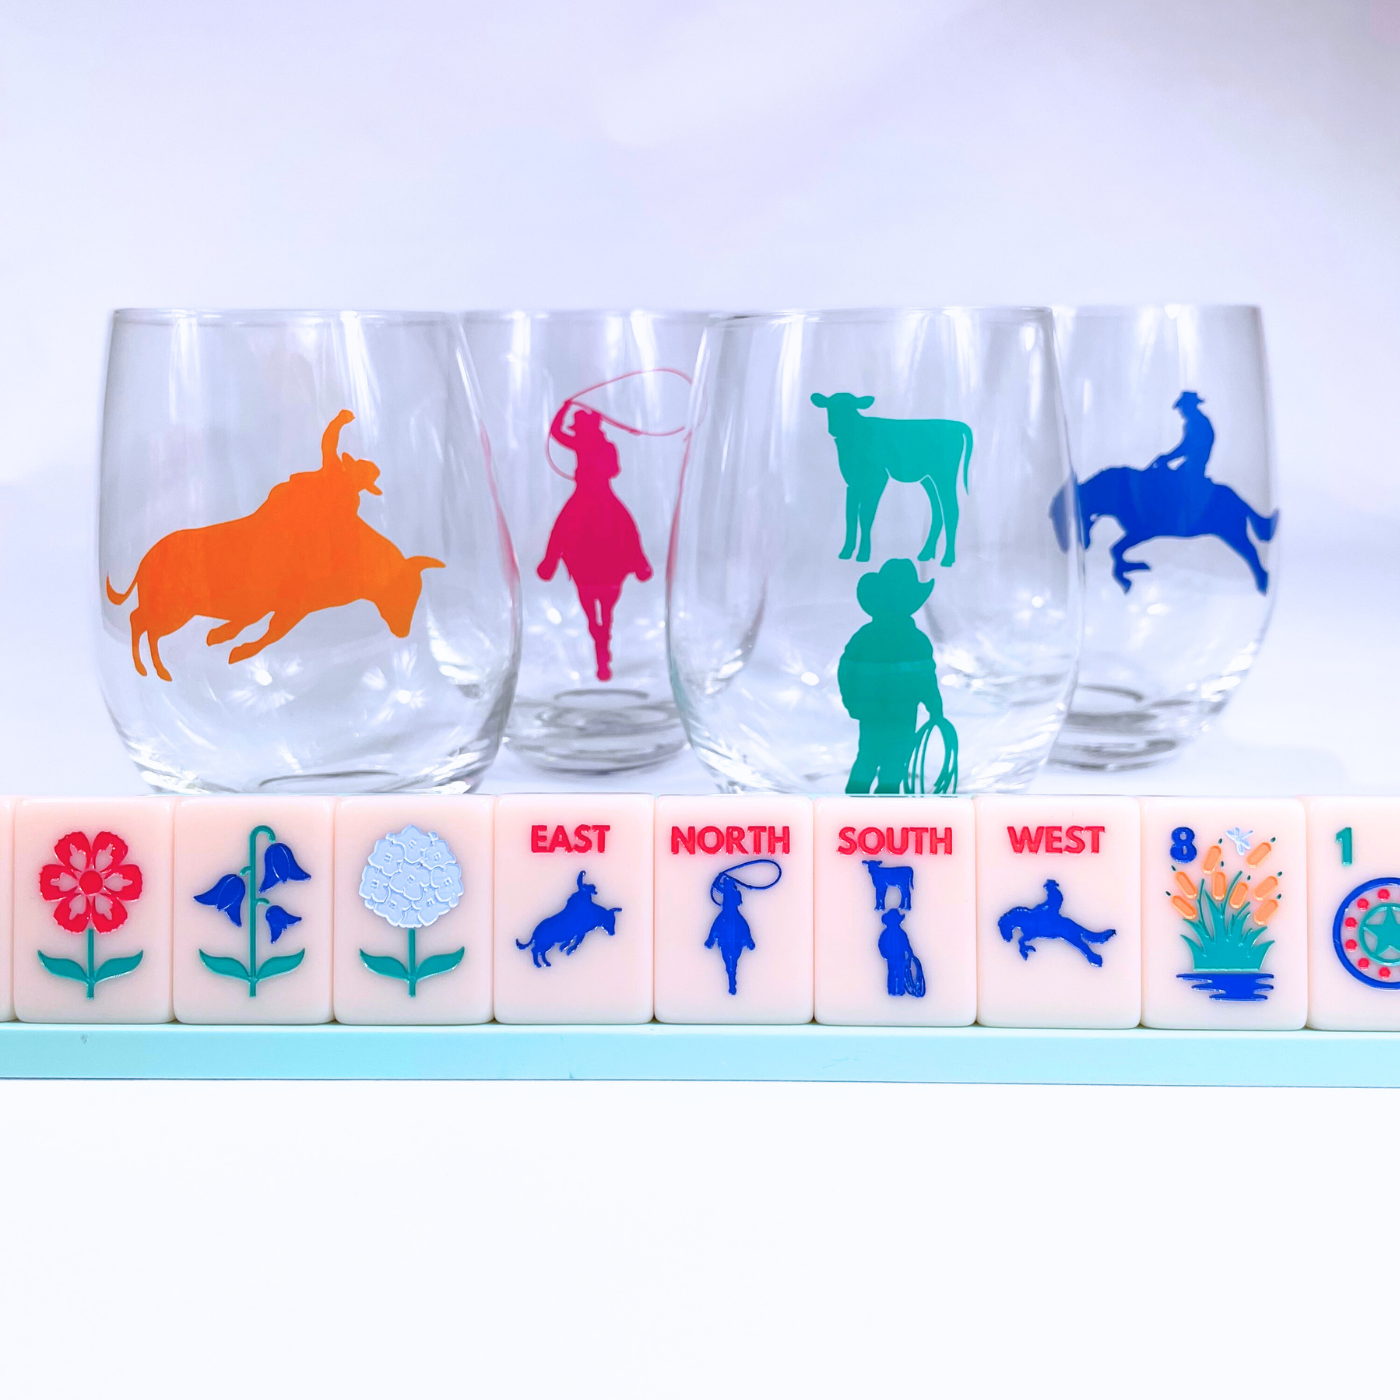 Rodeo Cowgirl Cowboy Stemless Wine Glasses (18oz) | Set of 4 | Great Cocktail Gift for Game Nights, Parties, Anytime!